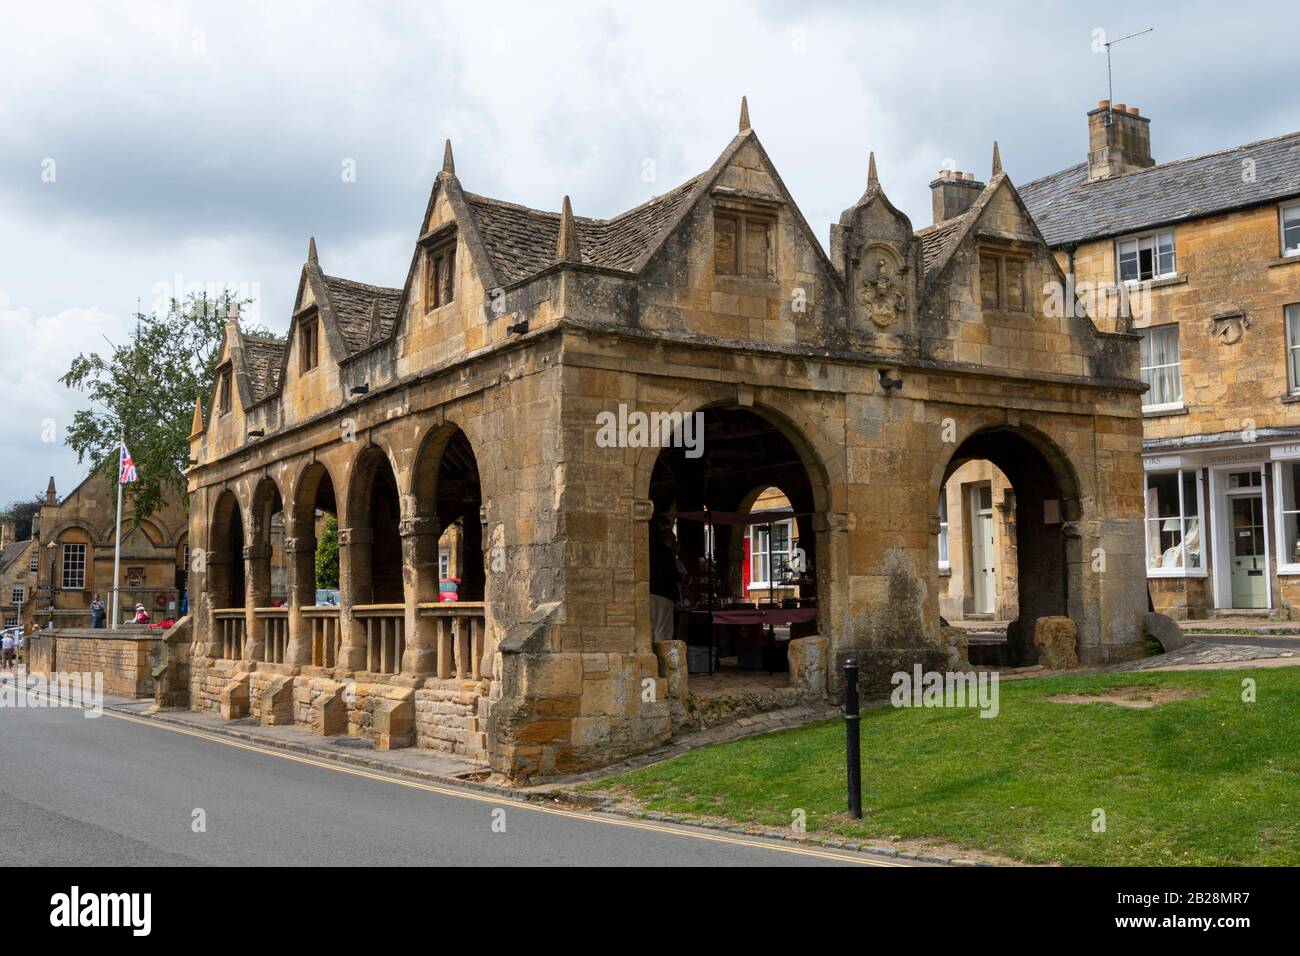 Market Hall, High Street,Chipping Campden, Gloucestershire, Cotswolds, England Stock Photo